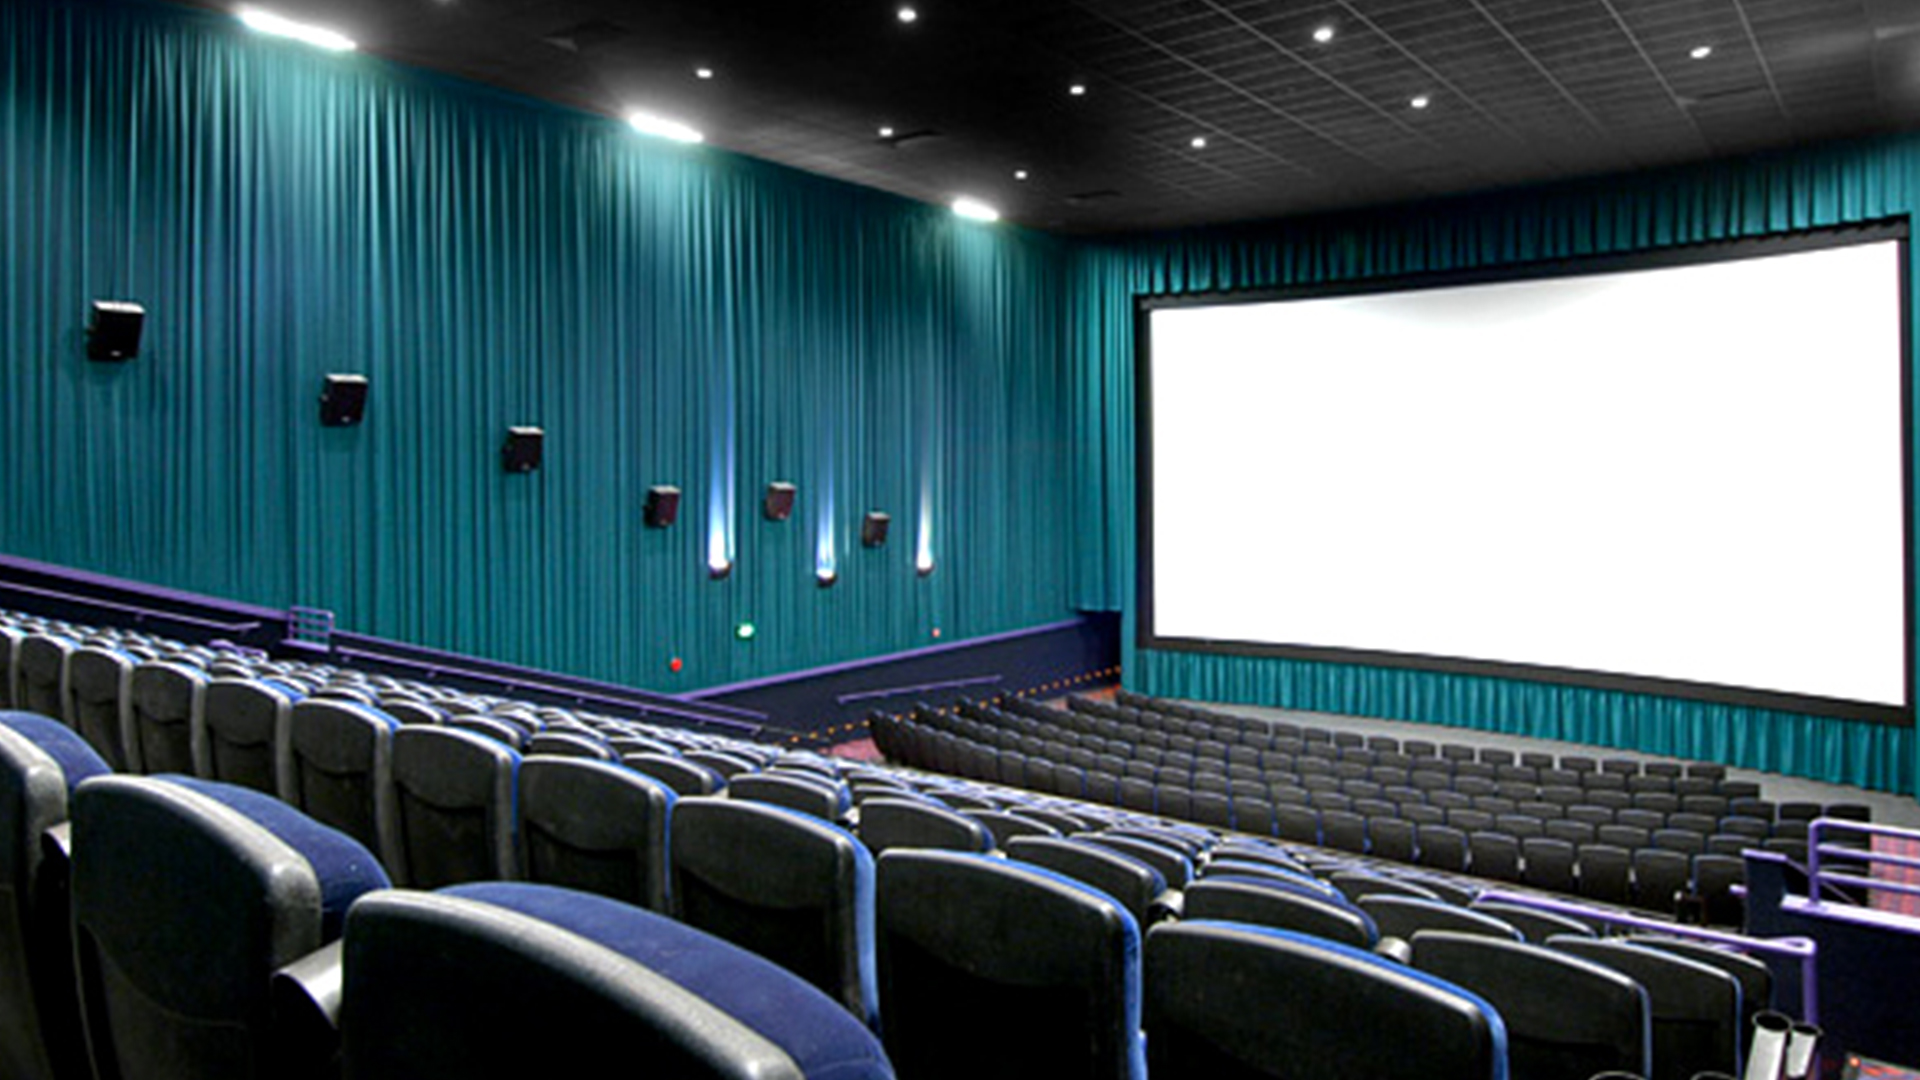 Stakeholders say millions of rupees will be lost if cinema halls are not opened